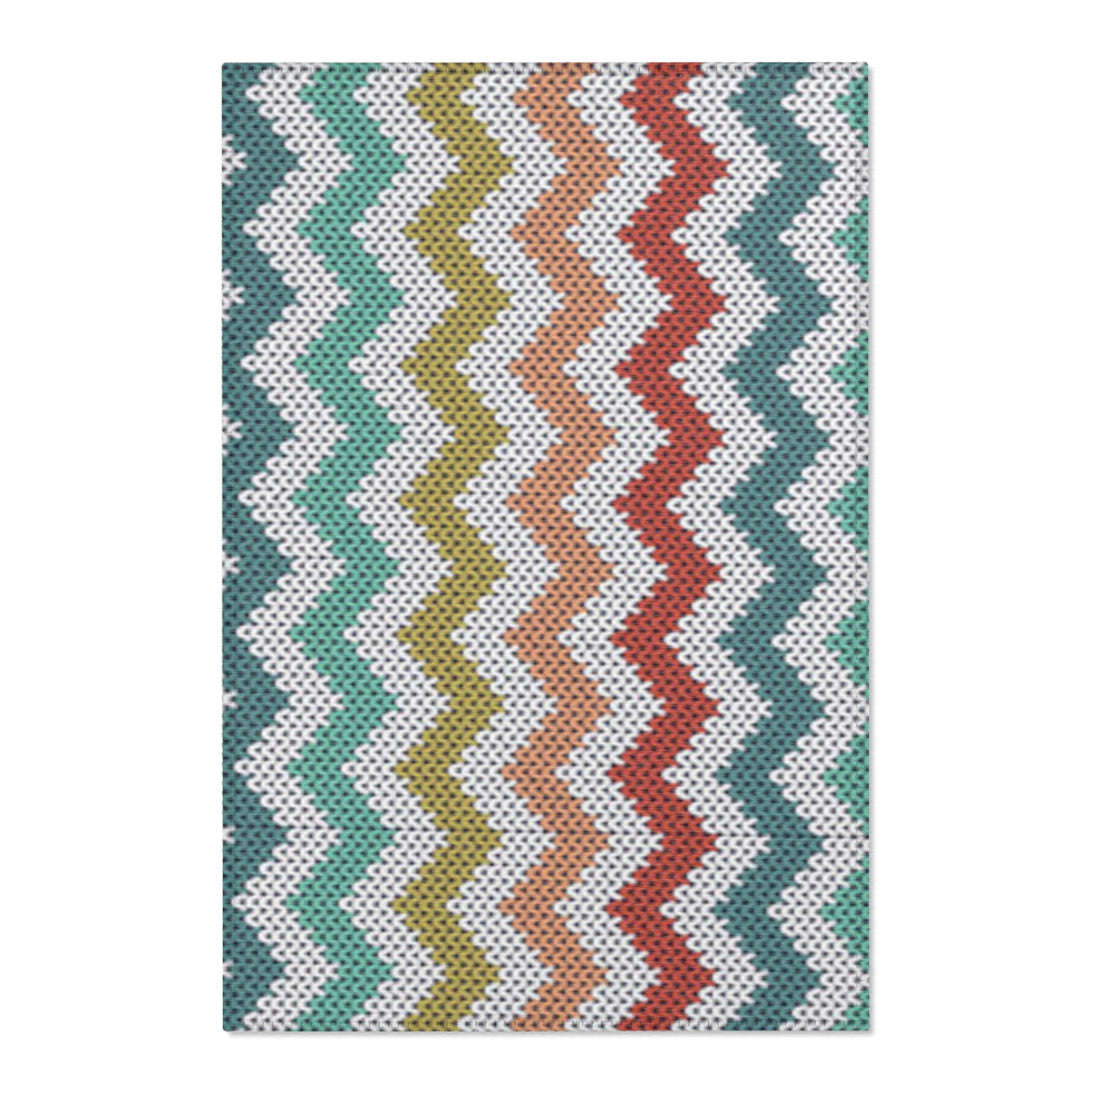 Area Rugs striped design spacious coverage bold stripes versatile decor durable material contemporary style floor accent soft texture east maintenance